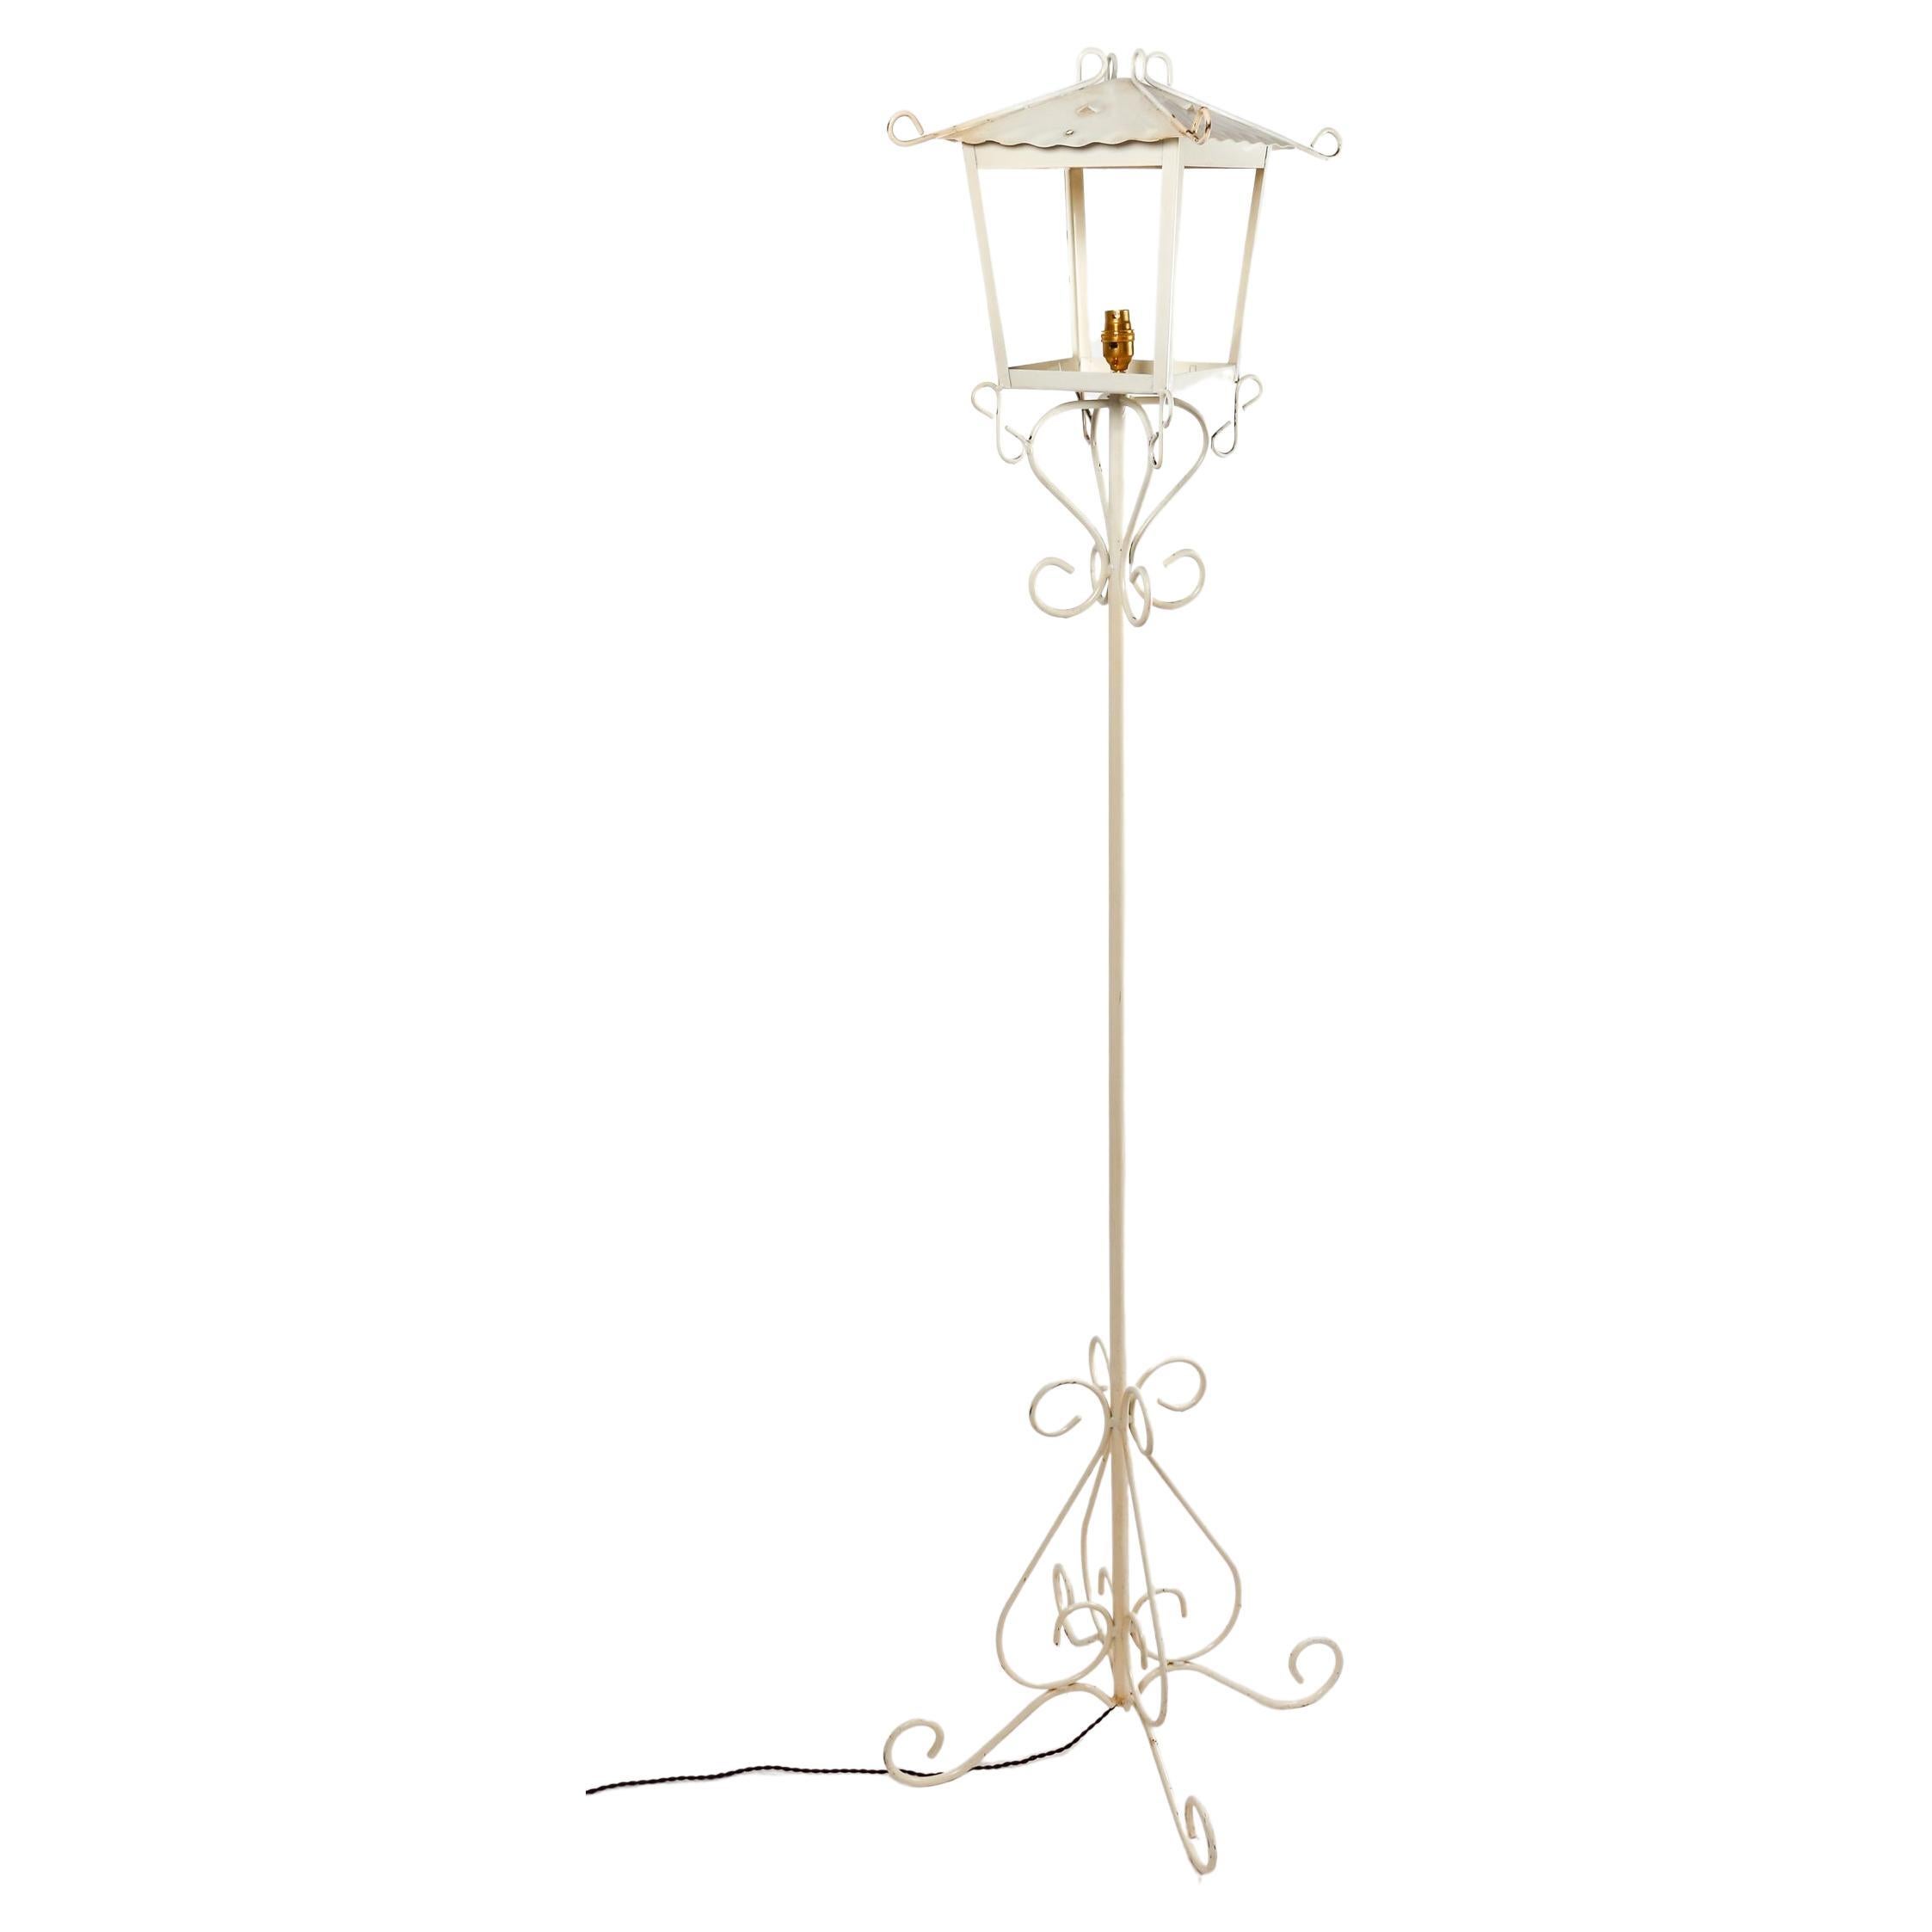 Floor lamp in Painted Wrought Iron by Maison R.Gleizes, 1950-1960 Design. For Sale